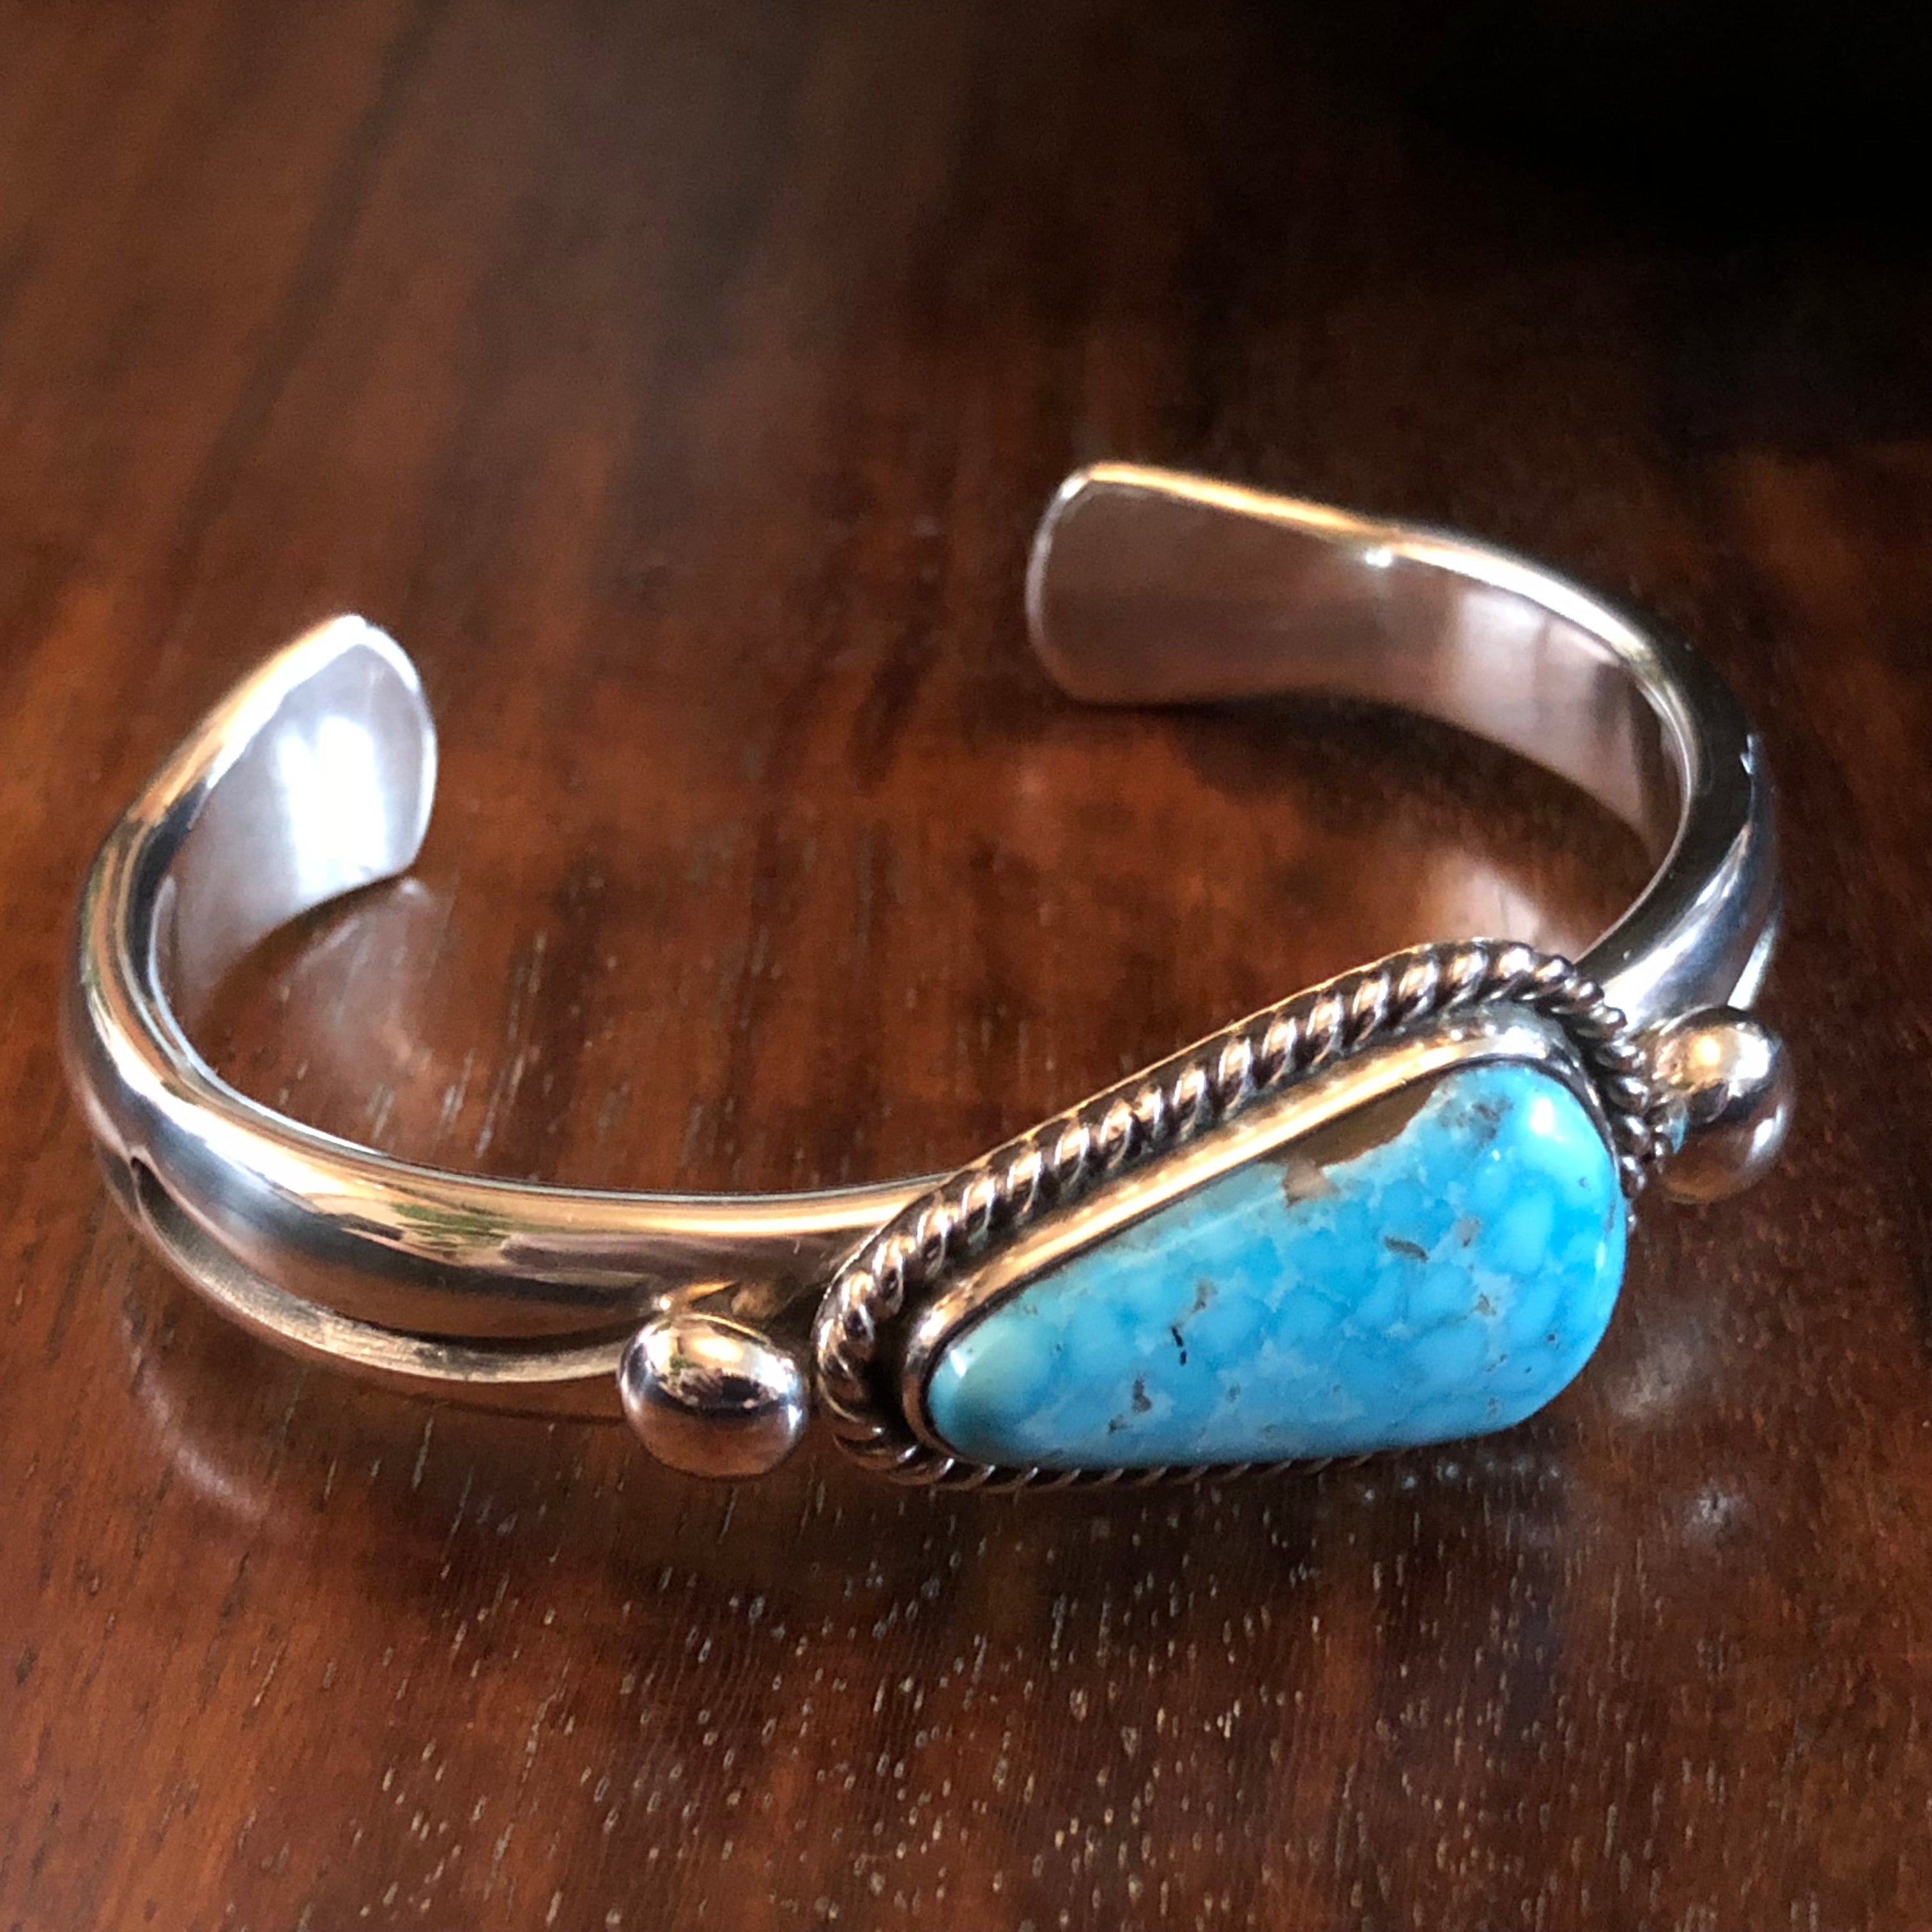 Native American Jewelry - Authentic Turquoise Jewelry